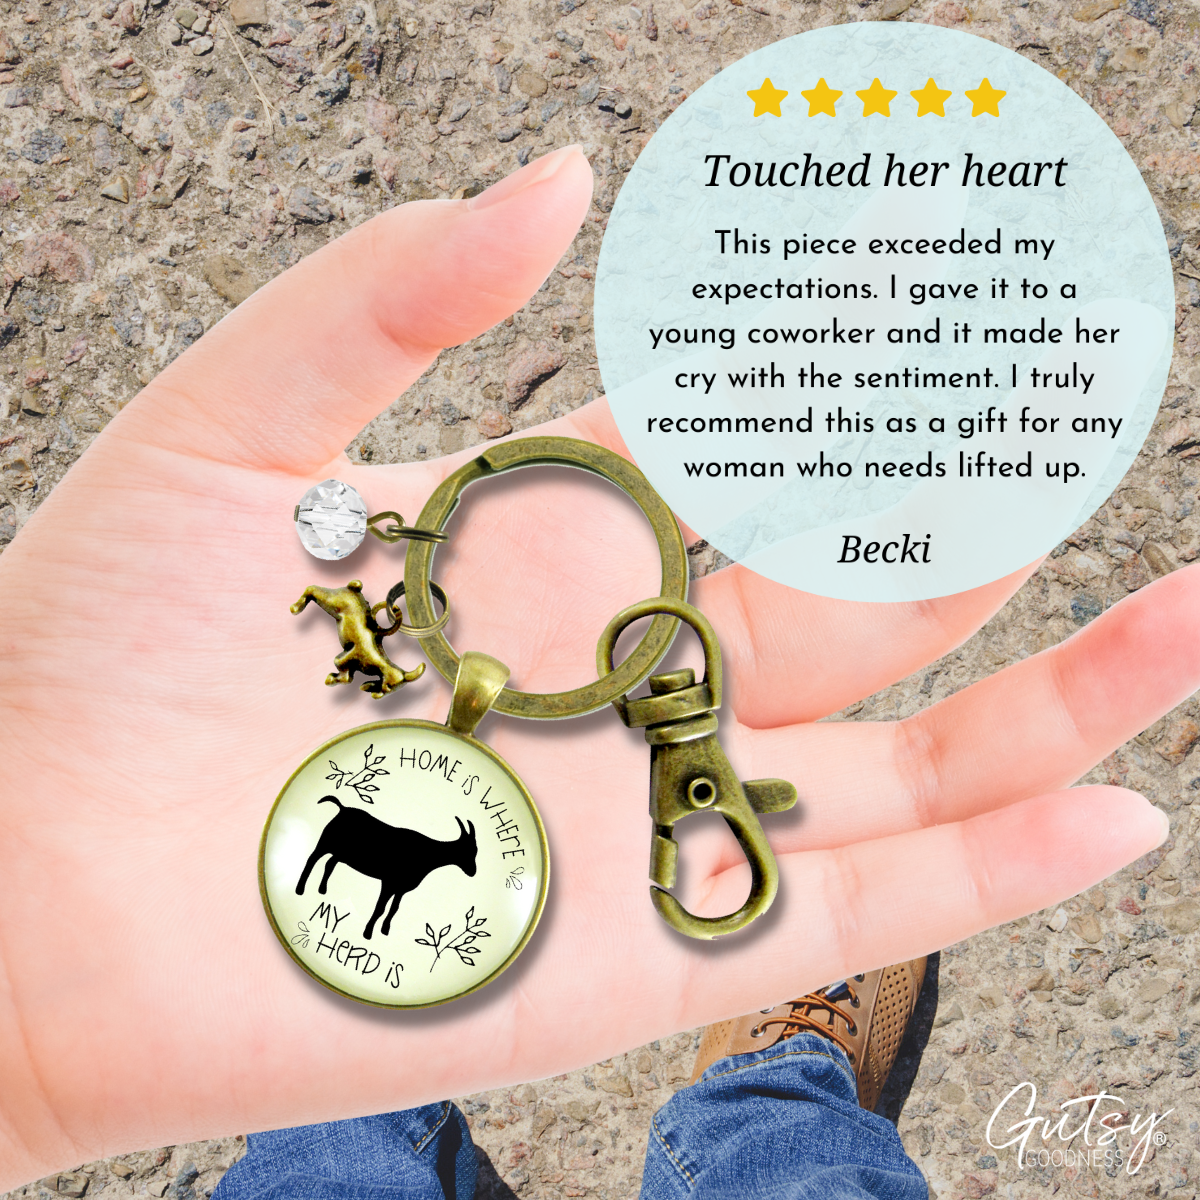 Goat Keychain Home is Where Your Herd is Jewelry Farmhouse Style - Gutsy Goodness Handmade Jewelry;Goat Keychain Home Is Where Your Herd Is Jewelry Farmhouse Style - Gutsy Goodness Handmade Jewelry Gifts